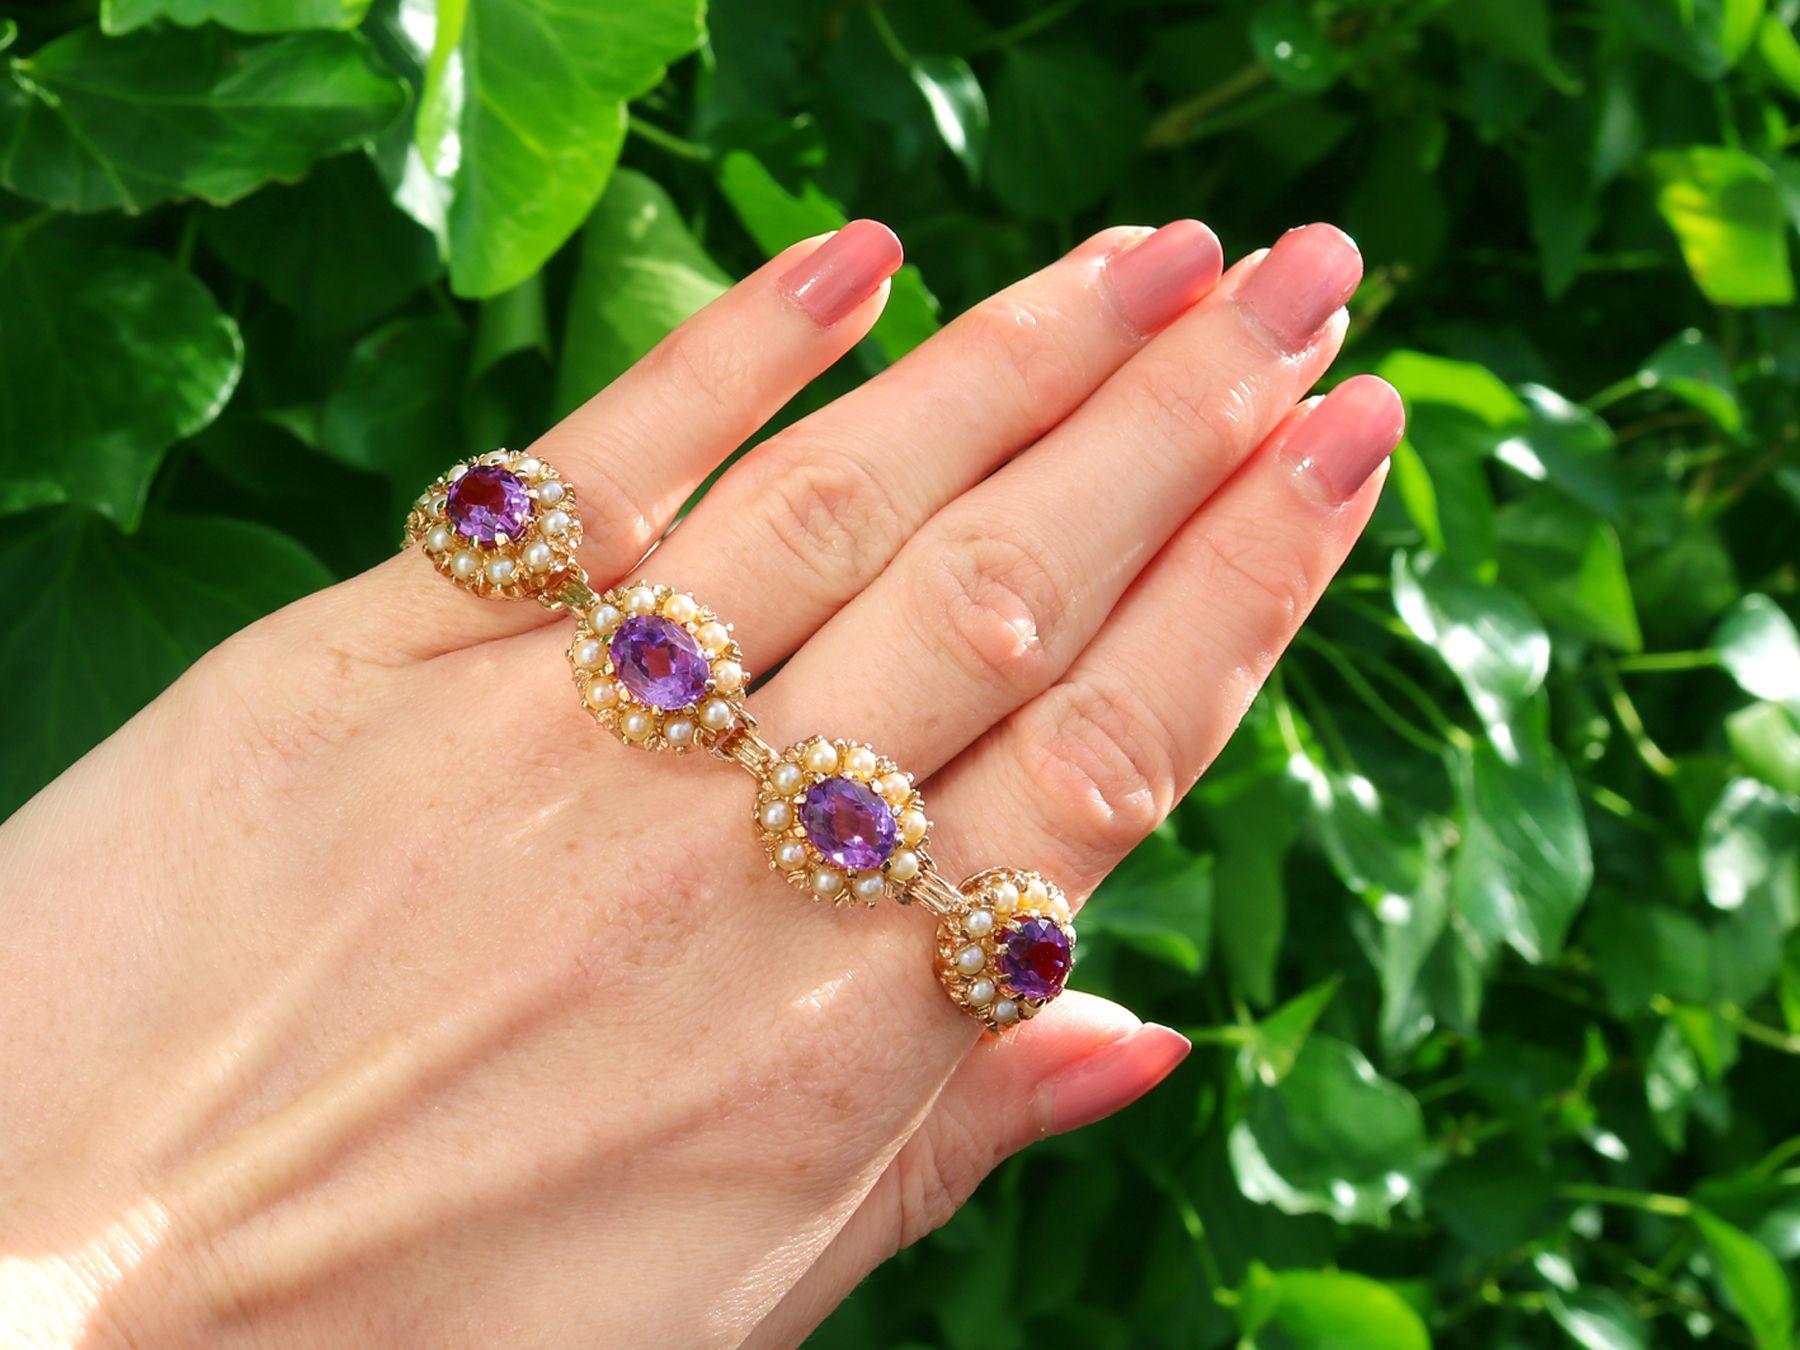 An exceptional, fine and impressive 19.80 carat amethyst, cultured pearl and 9 karat yellow gold bracelet; part of our diverse vintage jewelry and estate jewelry collections

This stunning vintage amethyst bracelet has been crafted in 9k yellow